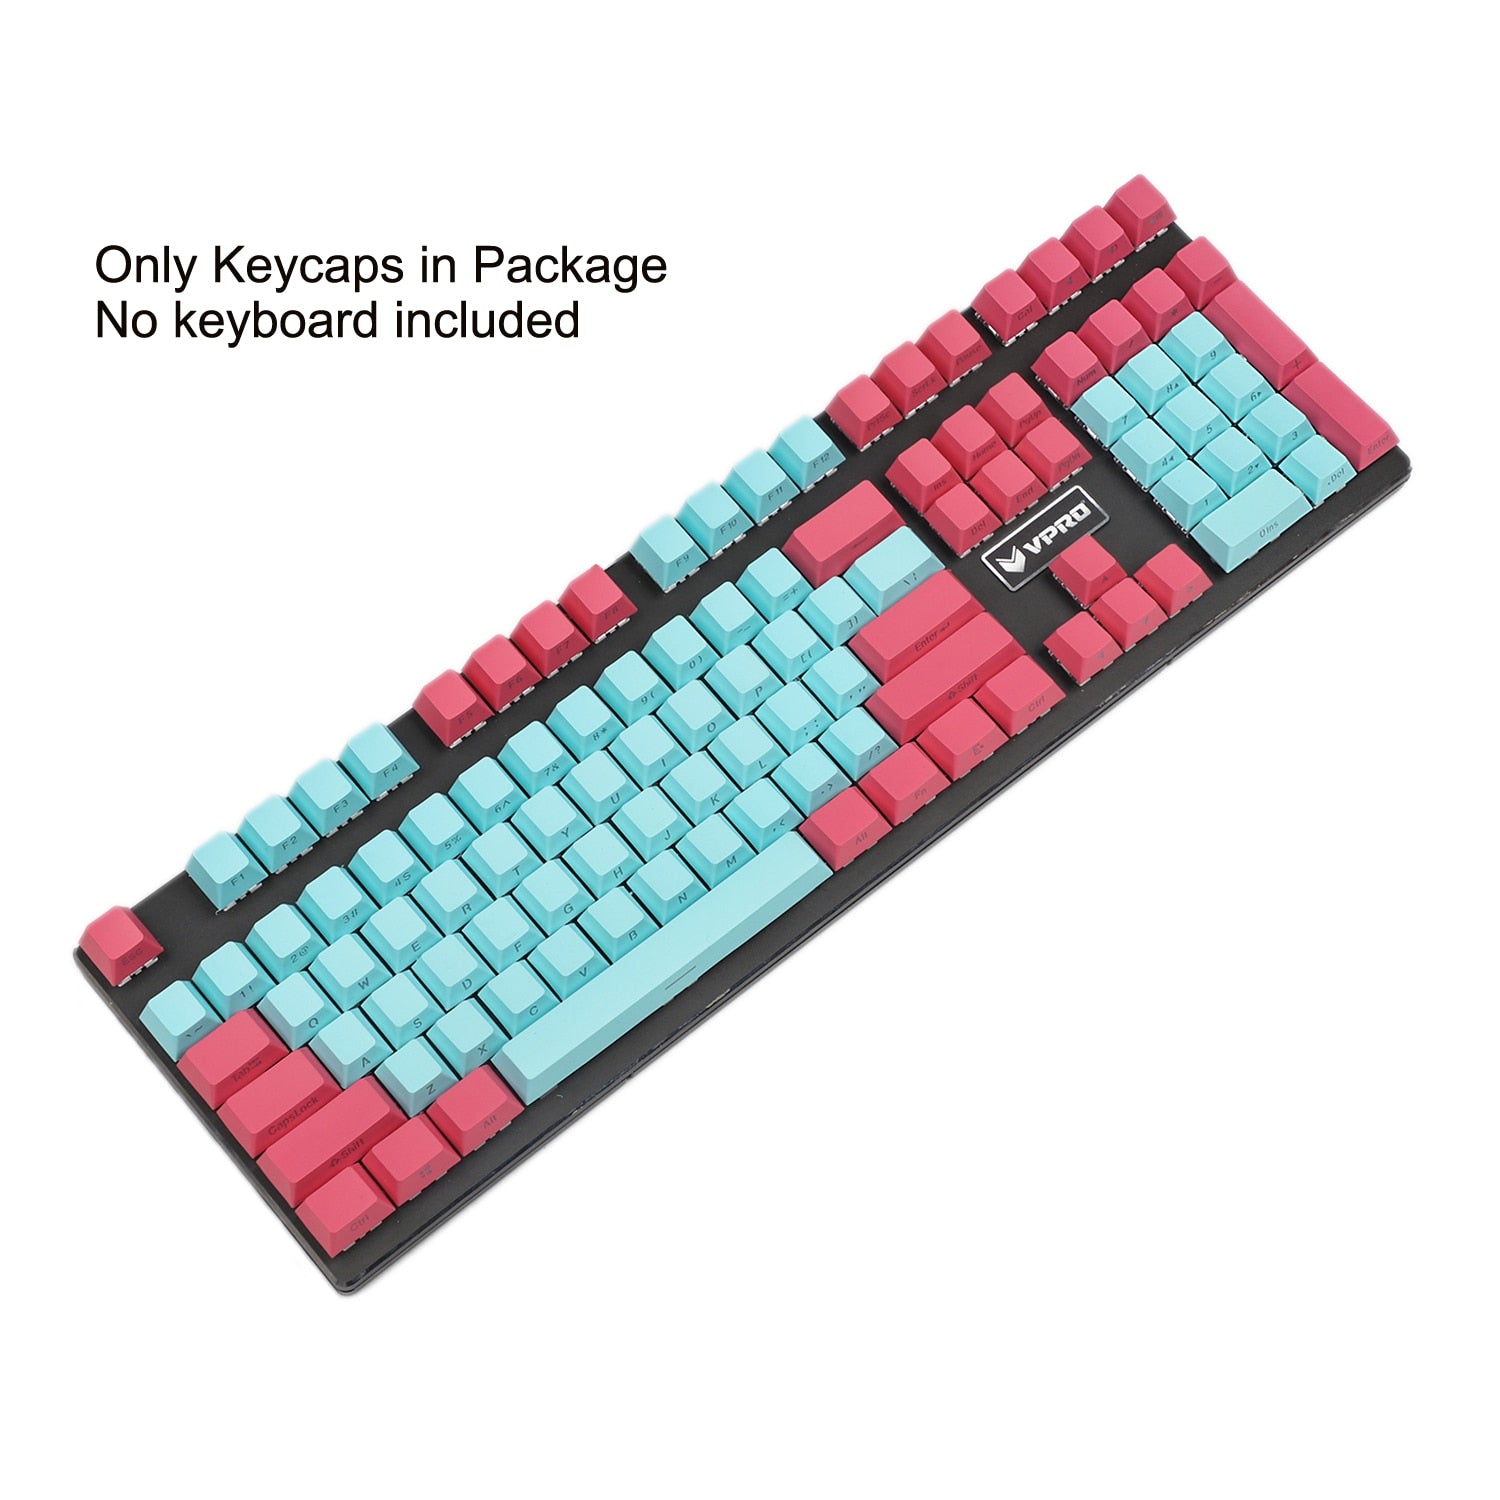 blue and pink south facing keycaps on a black mechanical keyboard